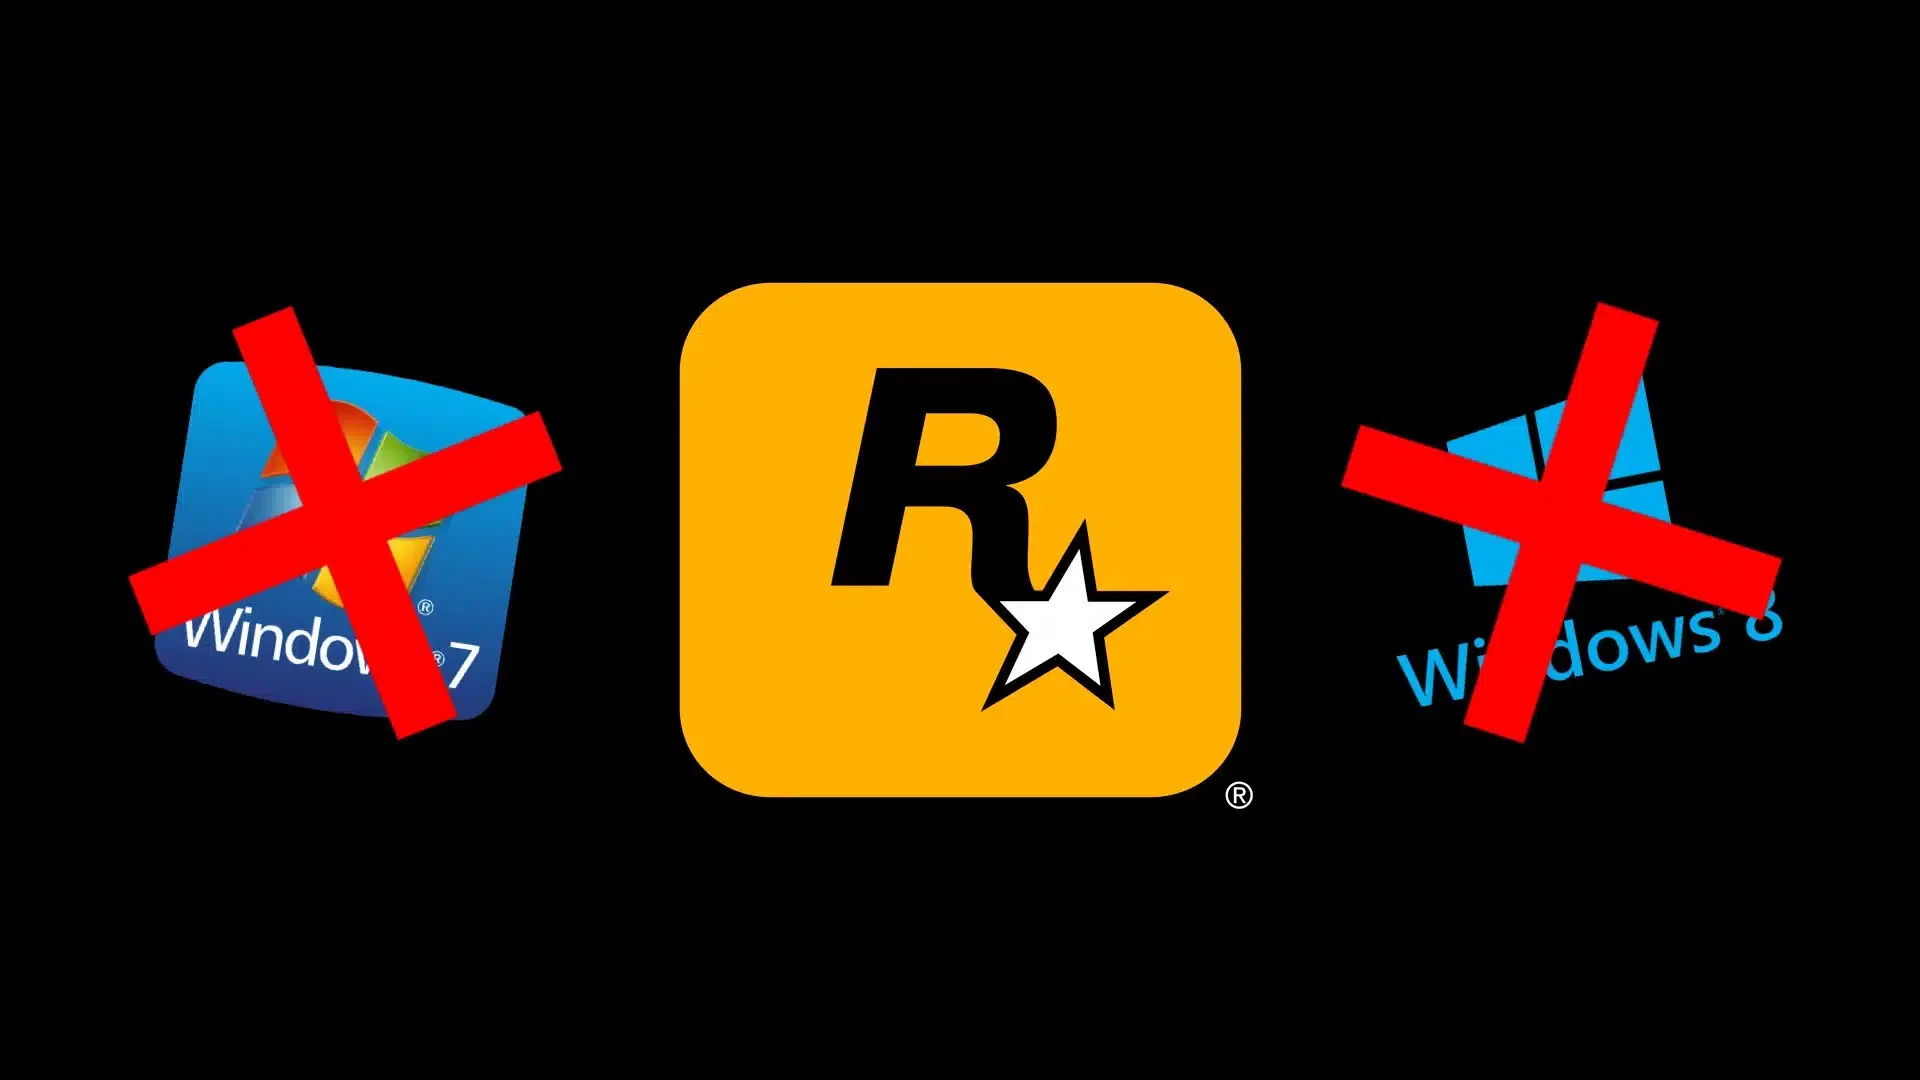 Rockstar Games are no longer available on Windows 7 and 8